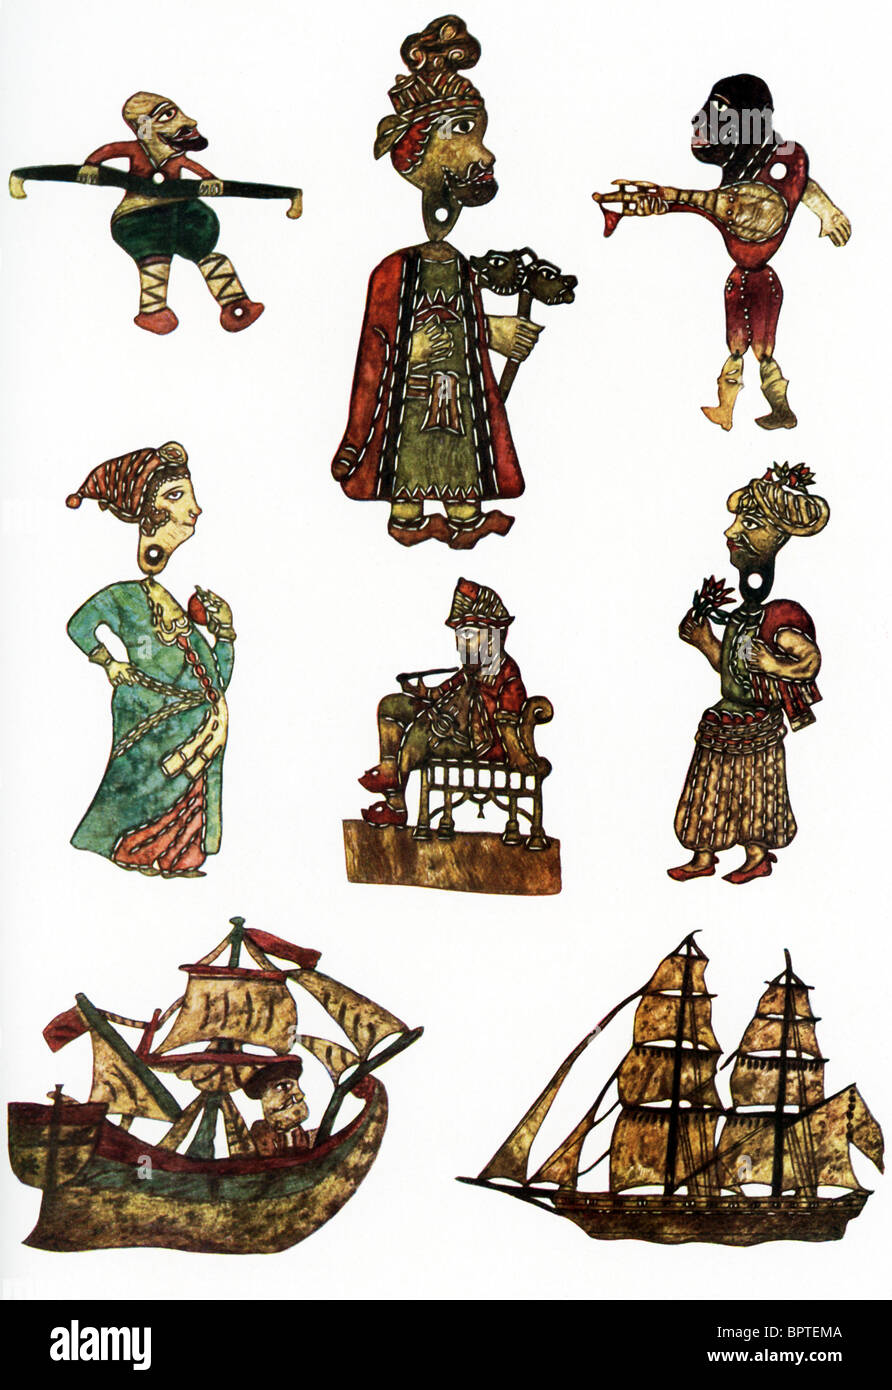 Karagoz  ("Black Eye") is the name for the traditional Turkish shadow puppet theater. Pictured here are 8 puppets. Stock Photo